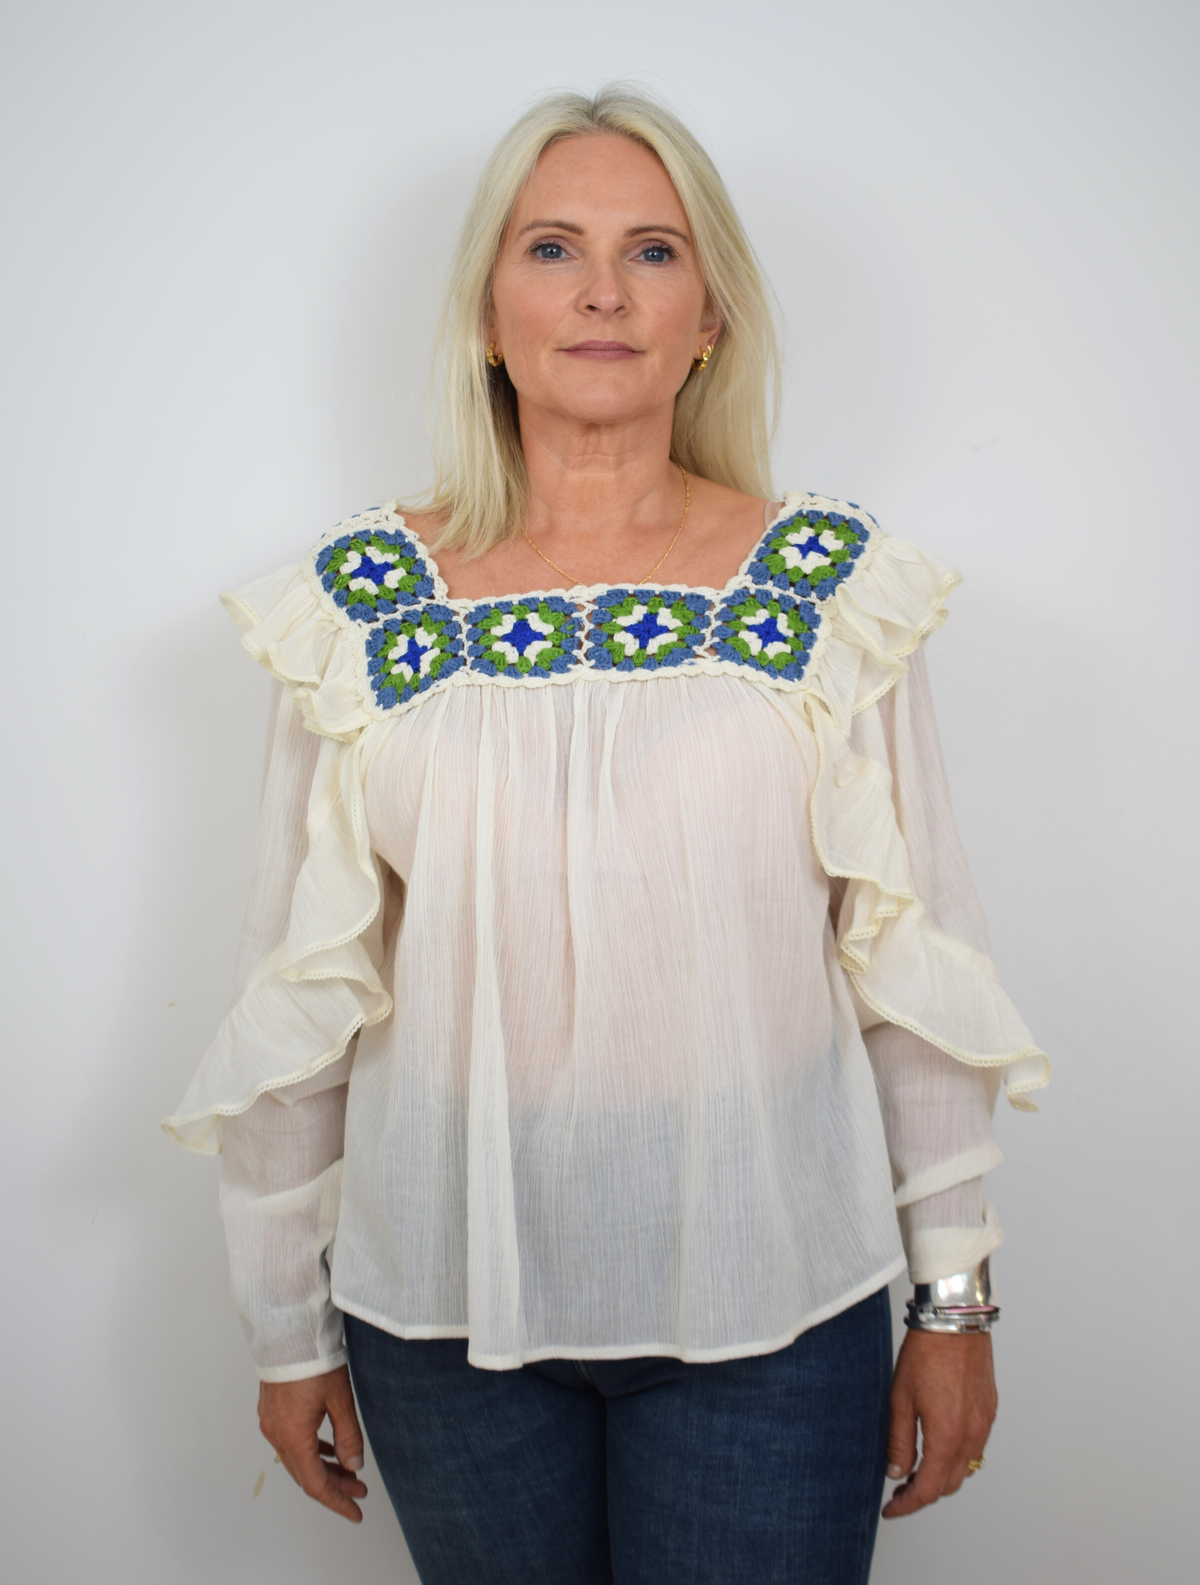 Ecru blouse with green and blue crocheted details around the square collar with ruffle details on shoulders and down arms